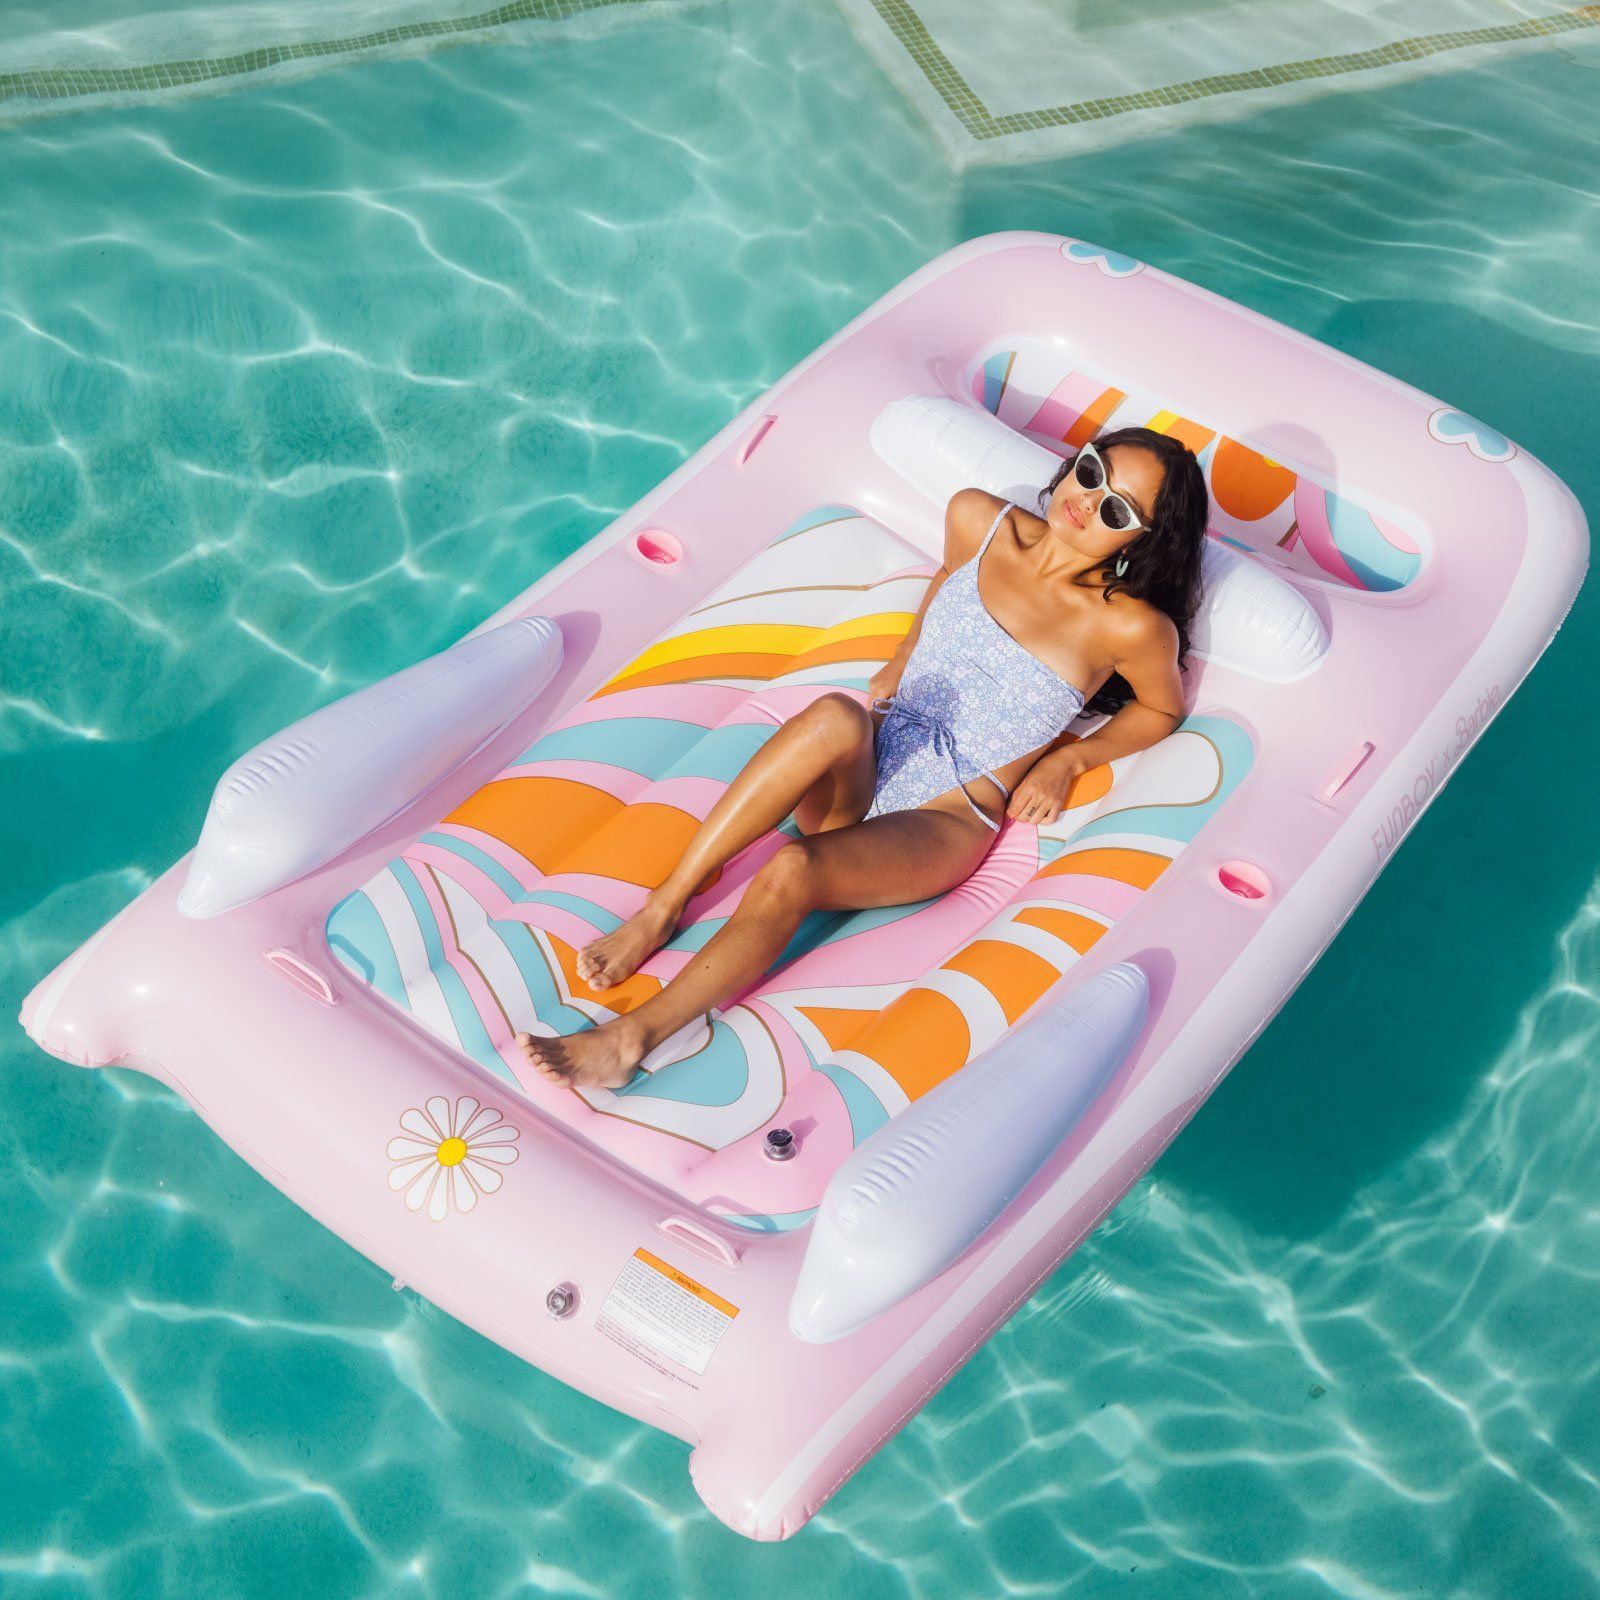 MC013 BONROB Inflatable Pool Float,Perfect for Bachelorette Party Engagement and Outer Water Lounge,Suits Adults &Children 